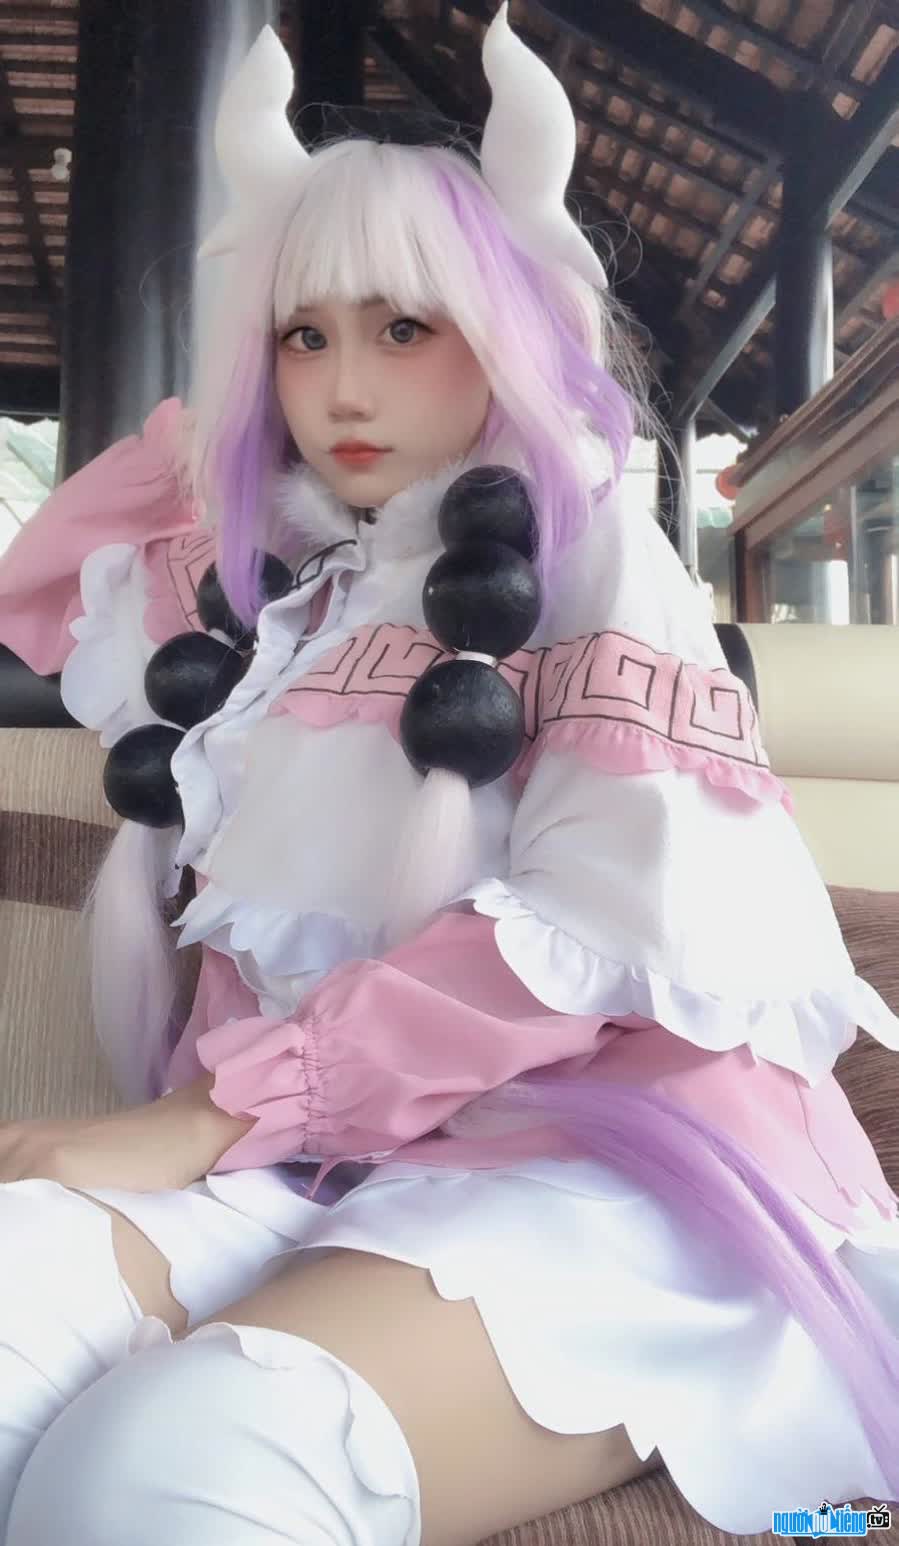 The hot teen also has a love for cosplay